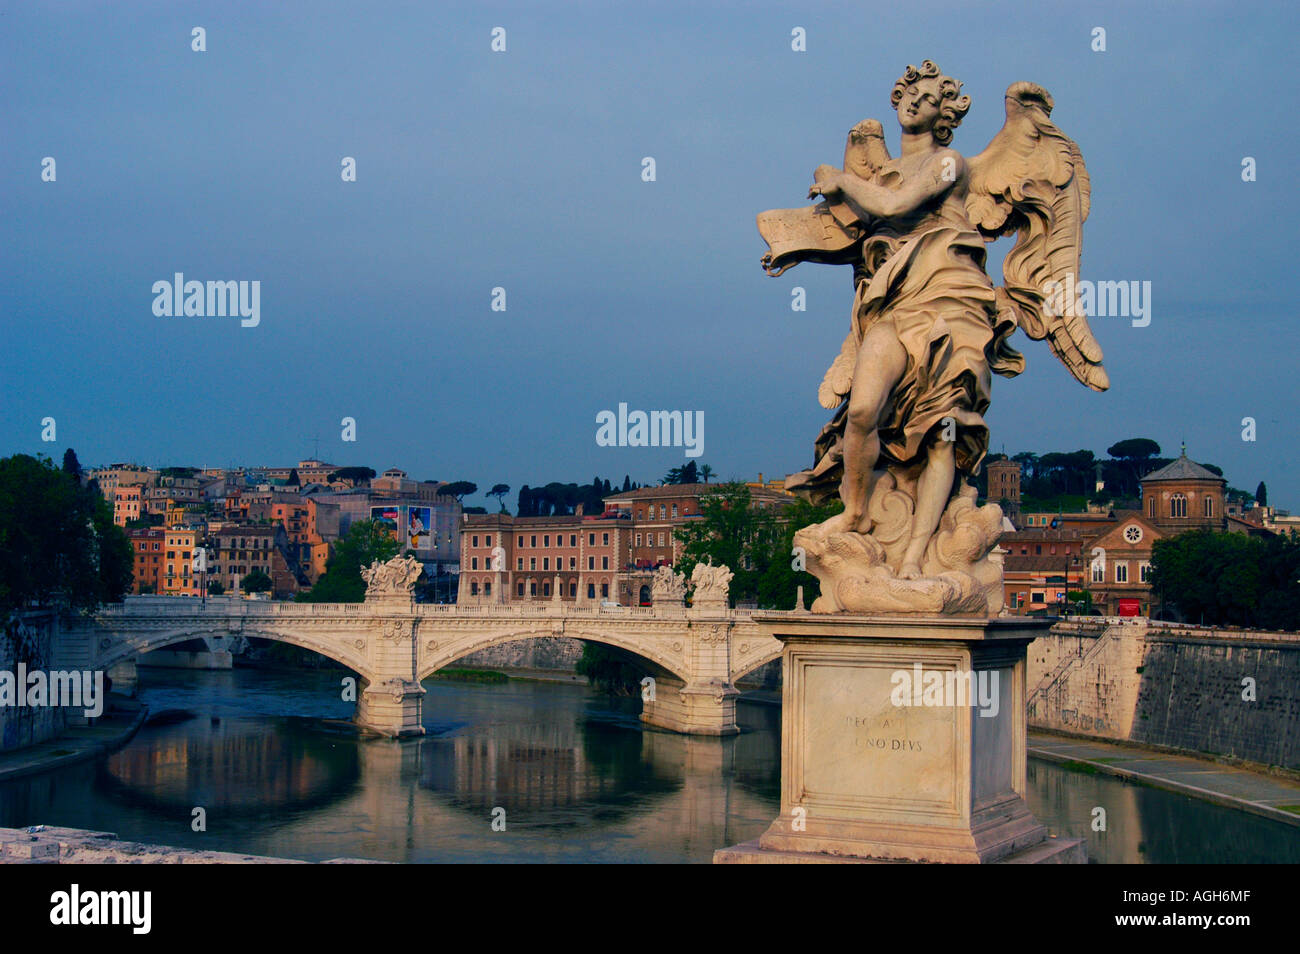 statue/sculpture of an arch angel on the famous bridge Ponte St. Angelo, Rome, Italy Stock Photo